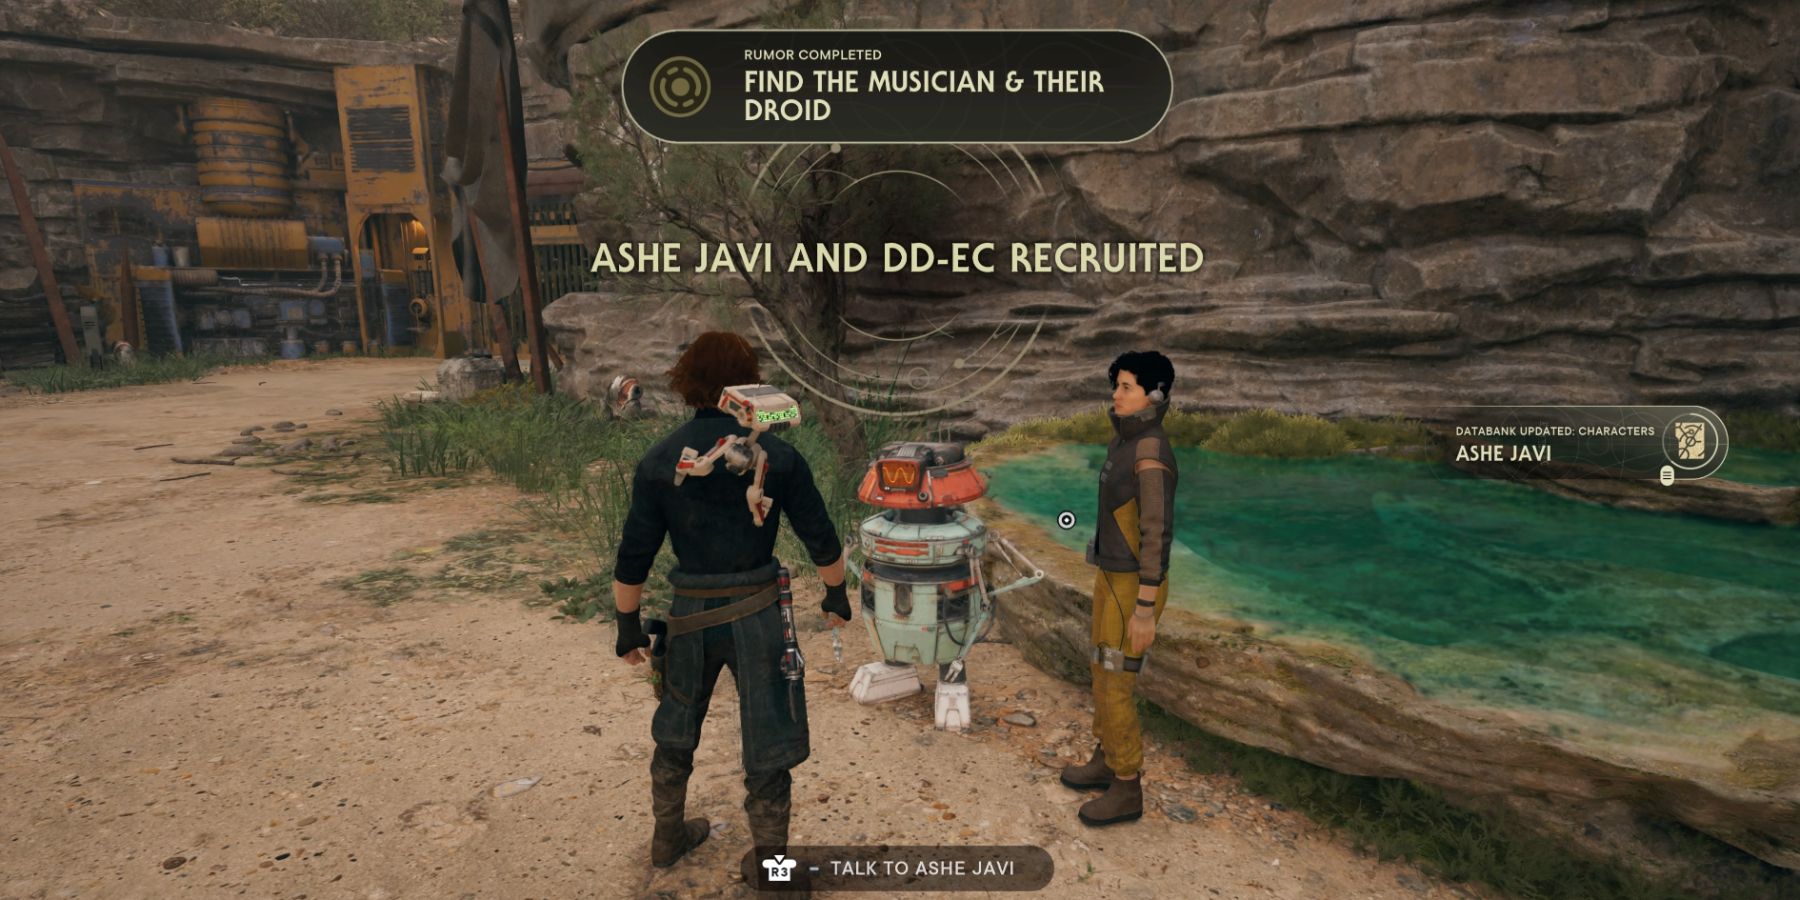 Completing the Find the Musician and their Droid Rumor in Star Wars Jedi: Survivor